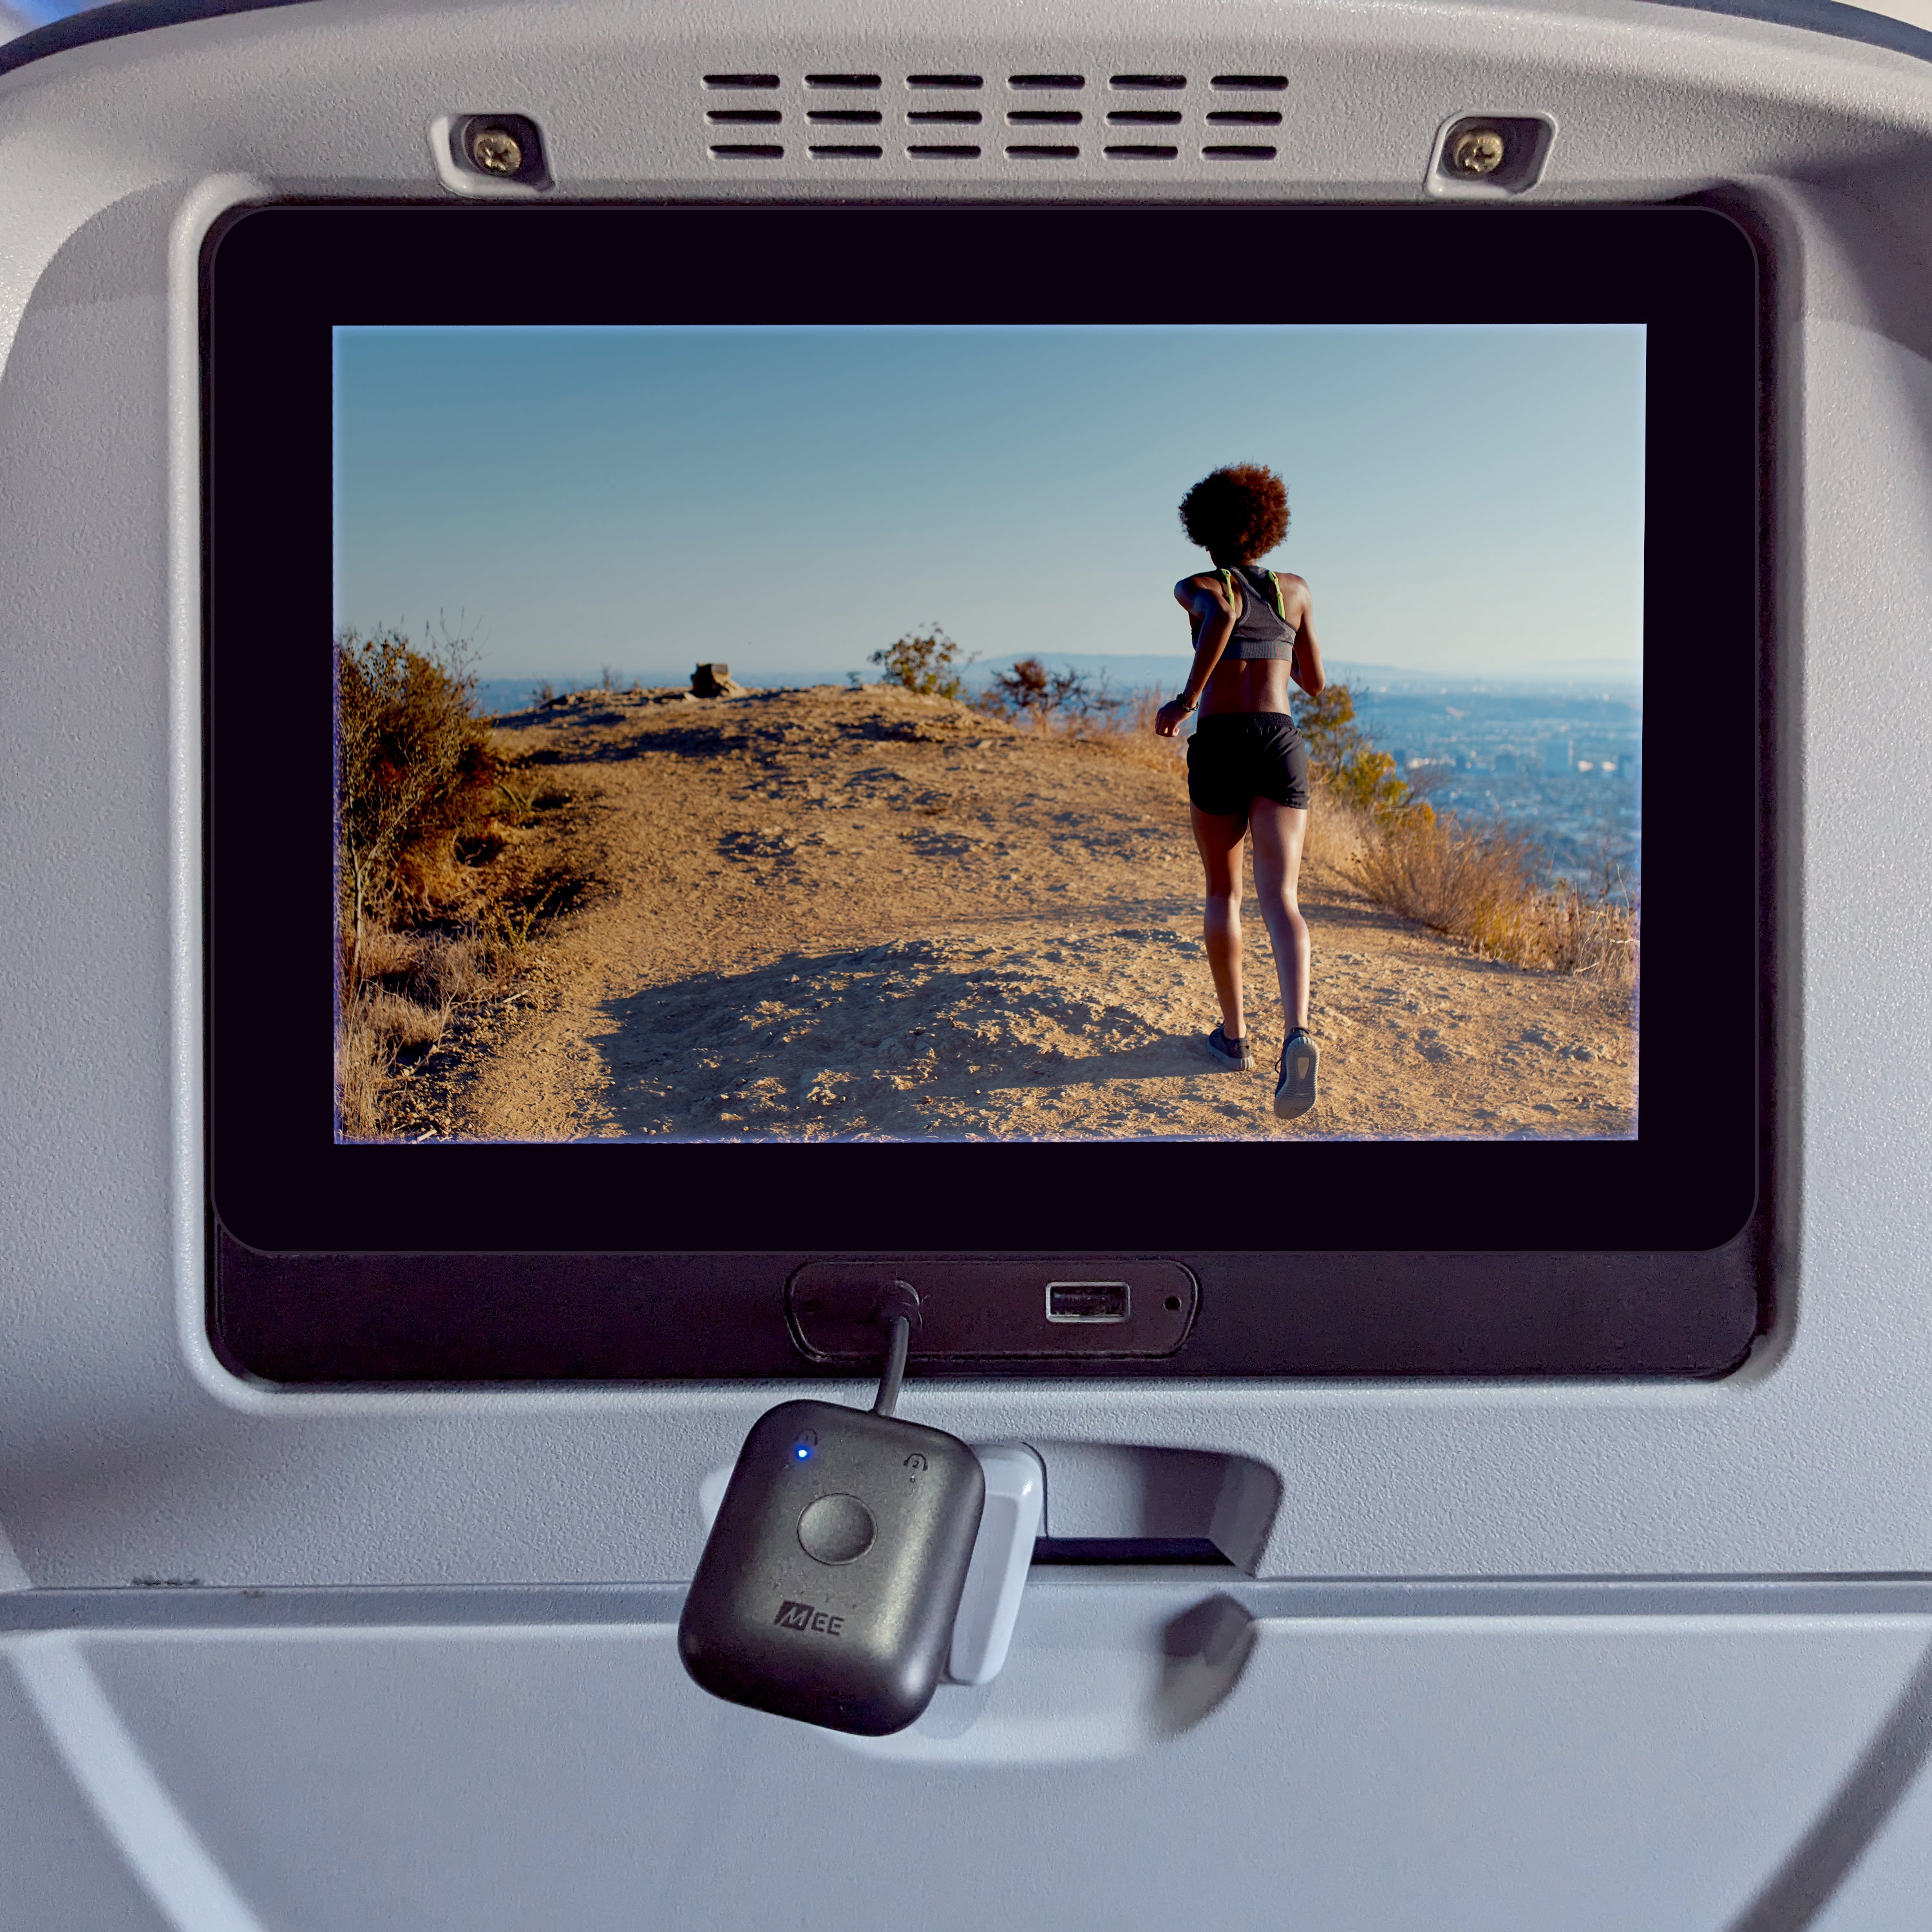 A car entertainment system screen displays an image of a young woman jogging on a mountain trail, overlooking a cityscape under a clear sky. an aux cable hangs in front of the screen.